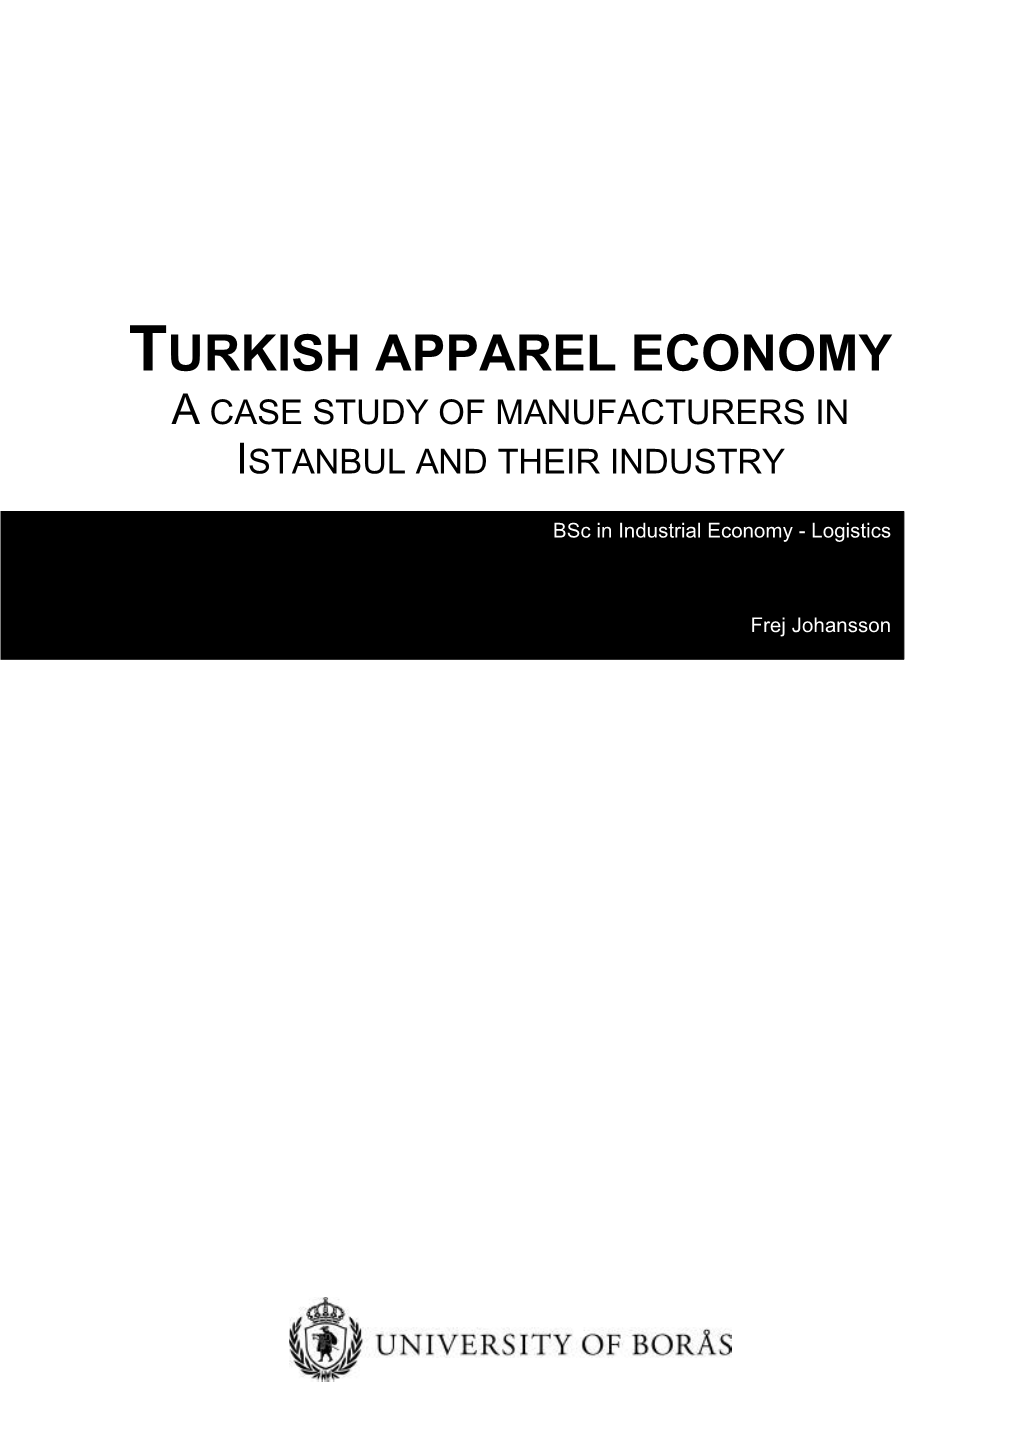 Turkish Apparel Economy a Case Study of Manufacturers in Istanbul and Their Industry